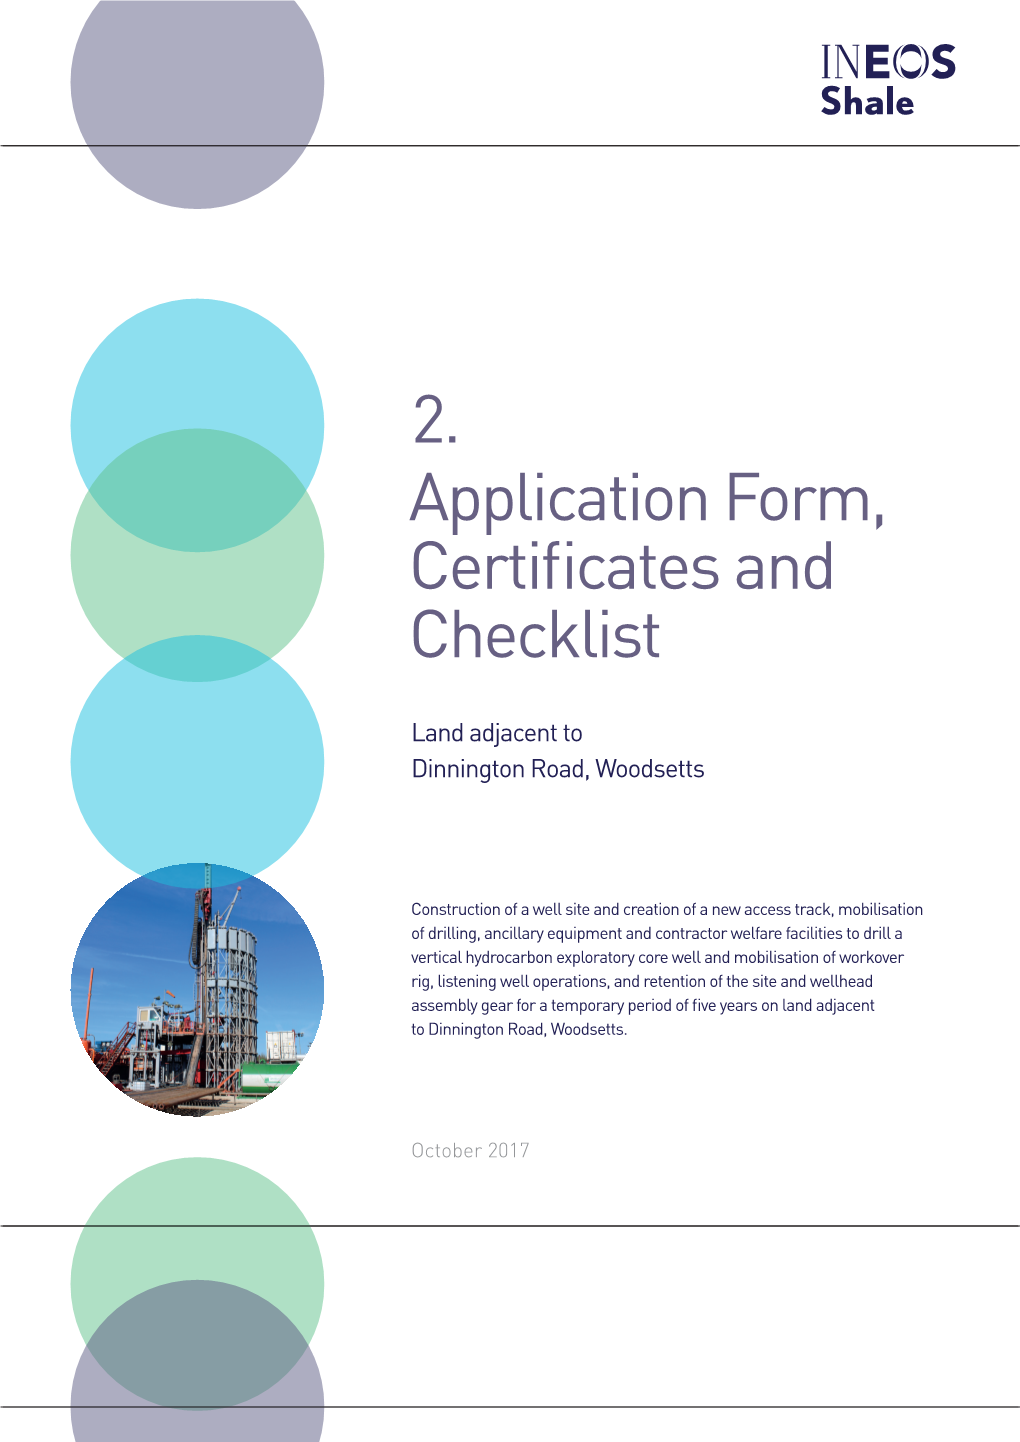 Application Form, Certificates and Checklist 2